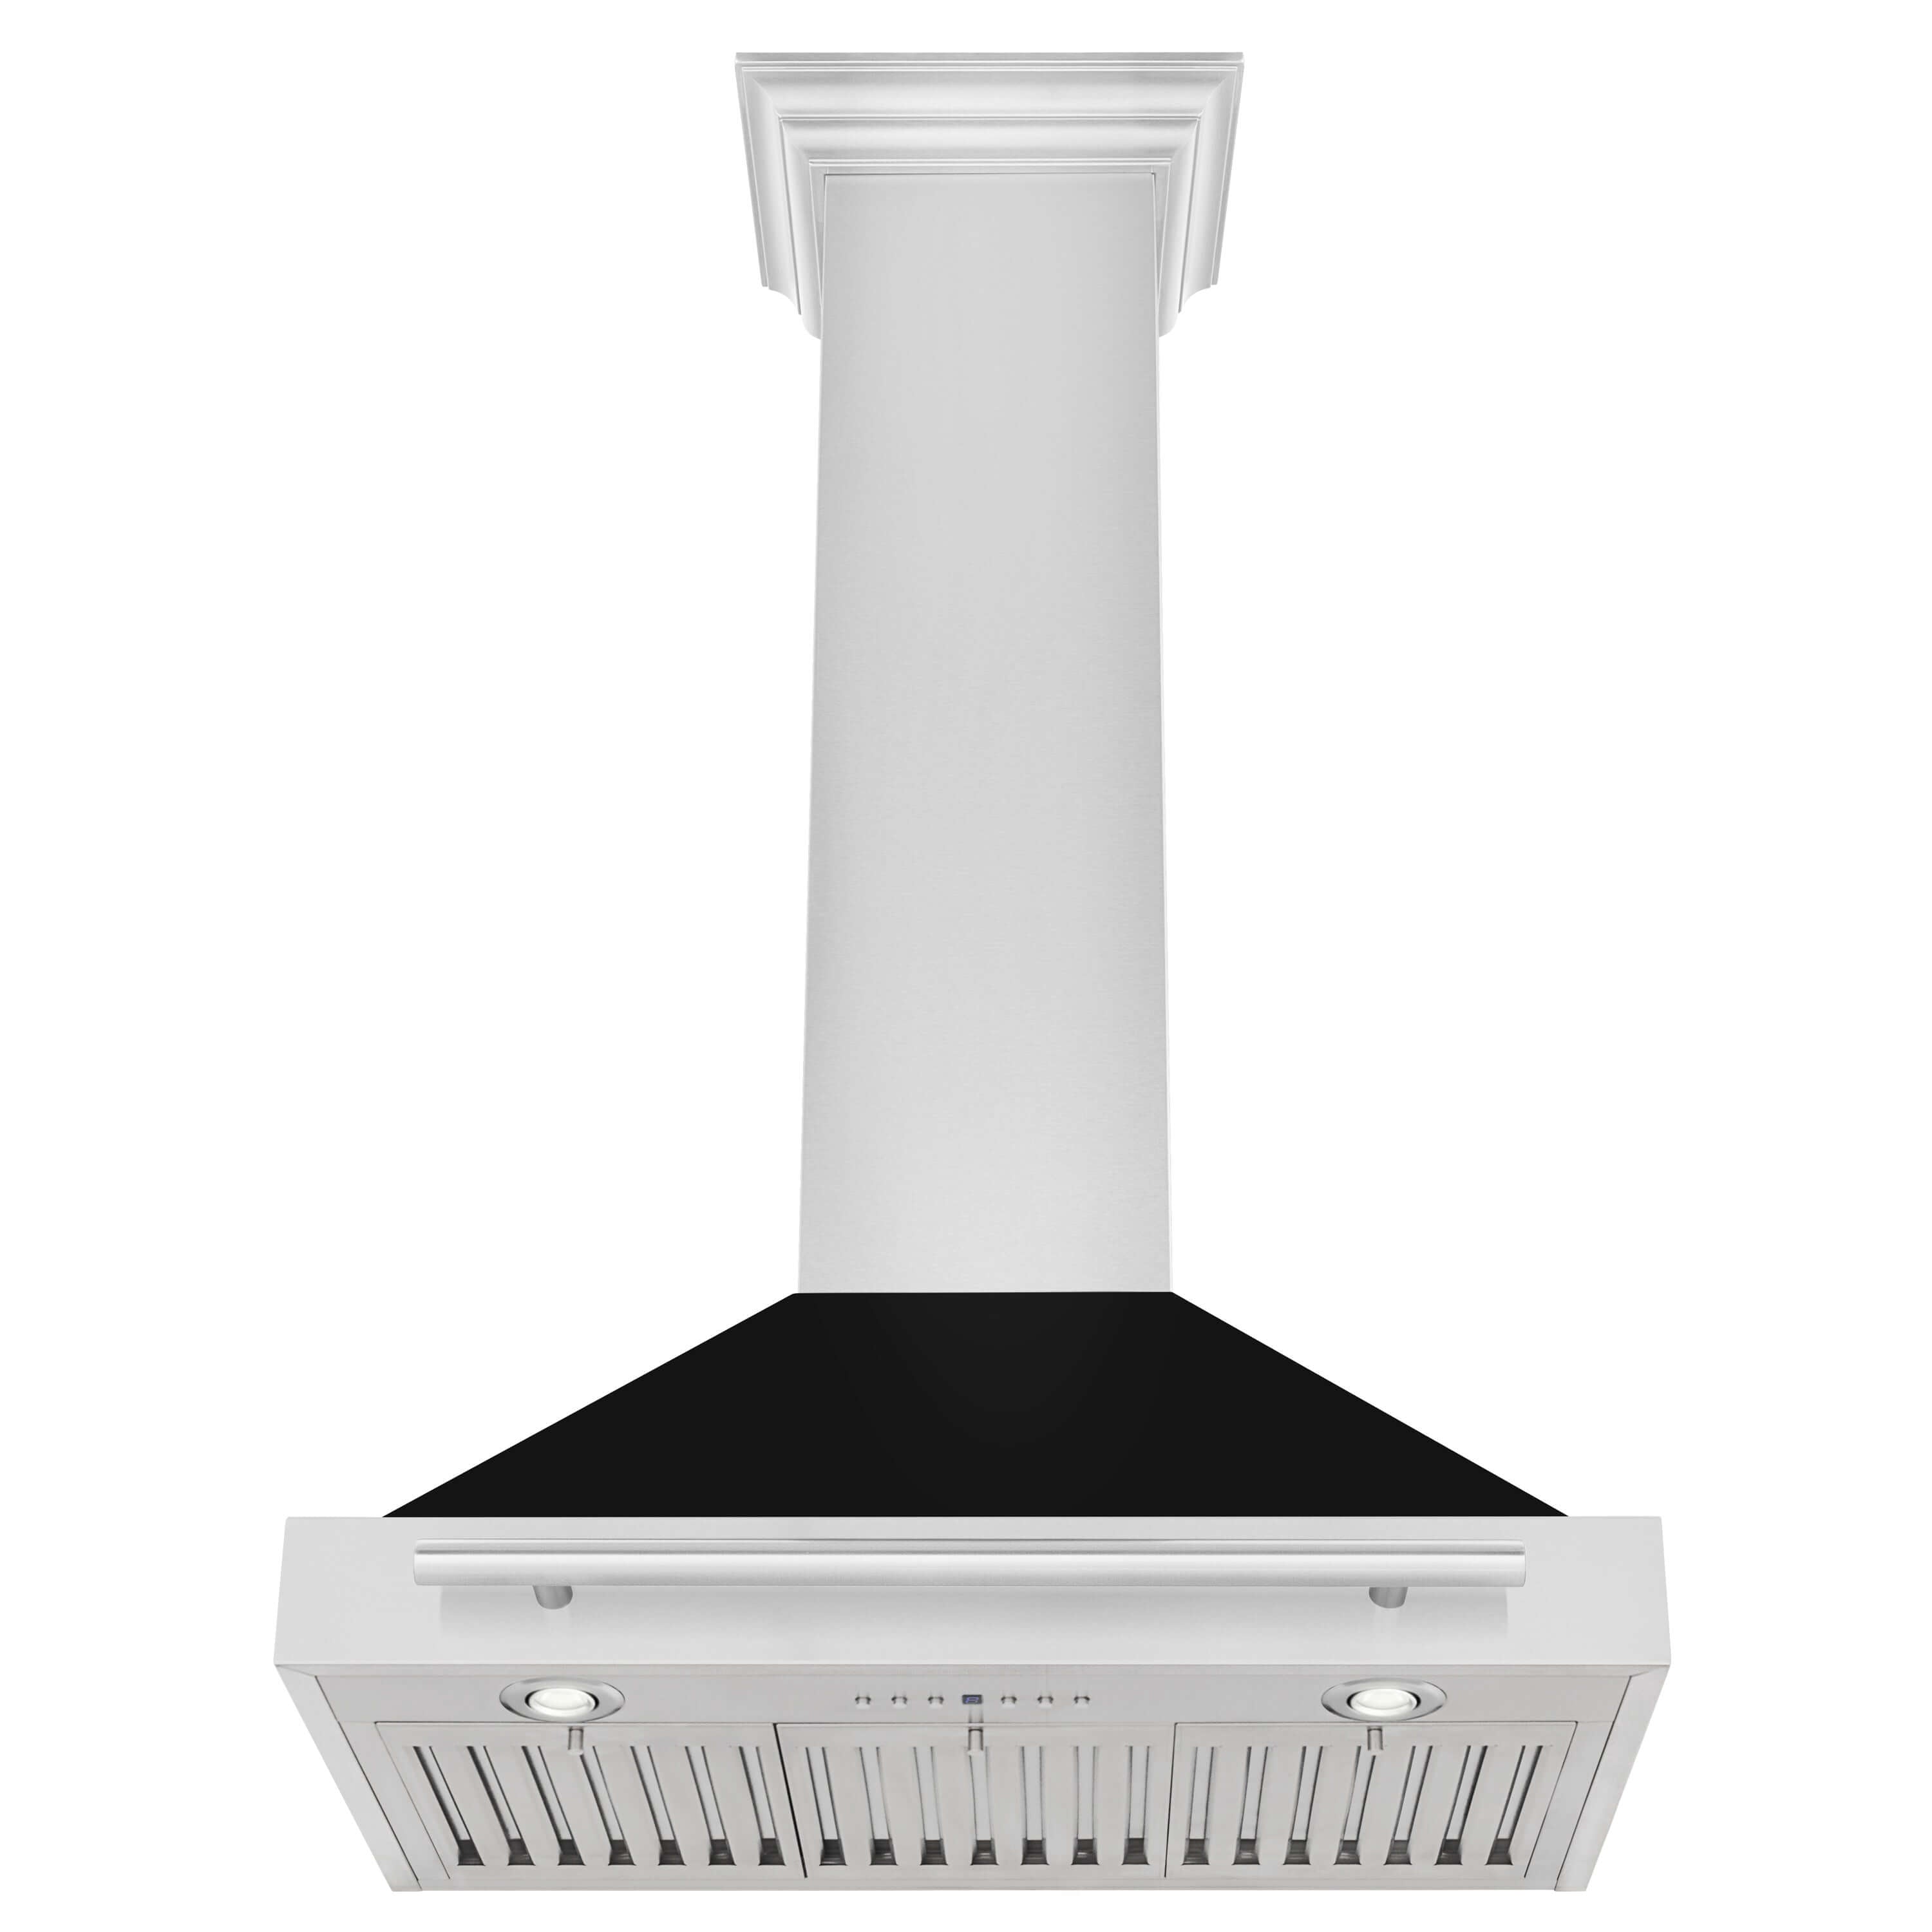 ZLINE 30 in. Stainless Steel Range Hood with Stainless Steel Handle and Colored Shell Options (KB4STX-30) front, under.